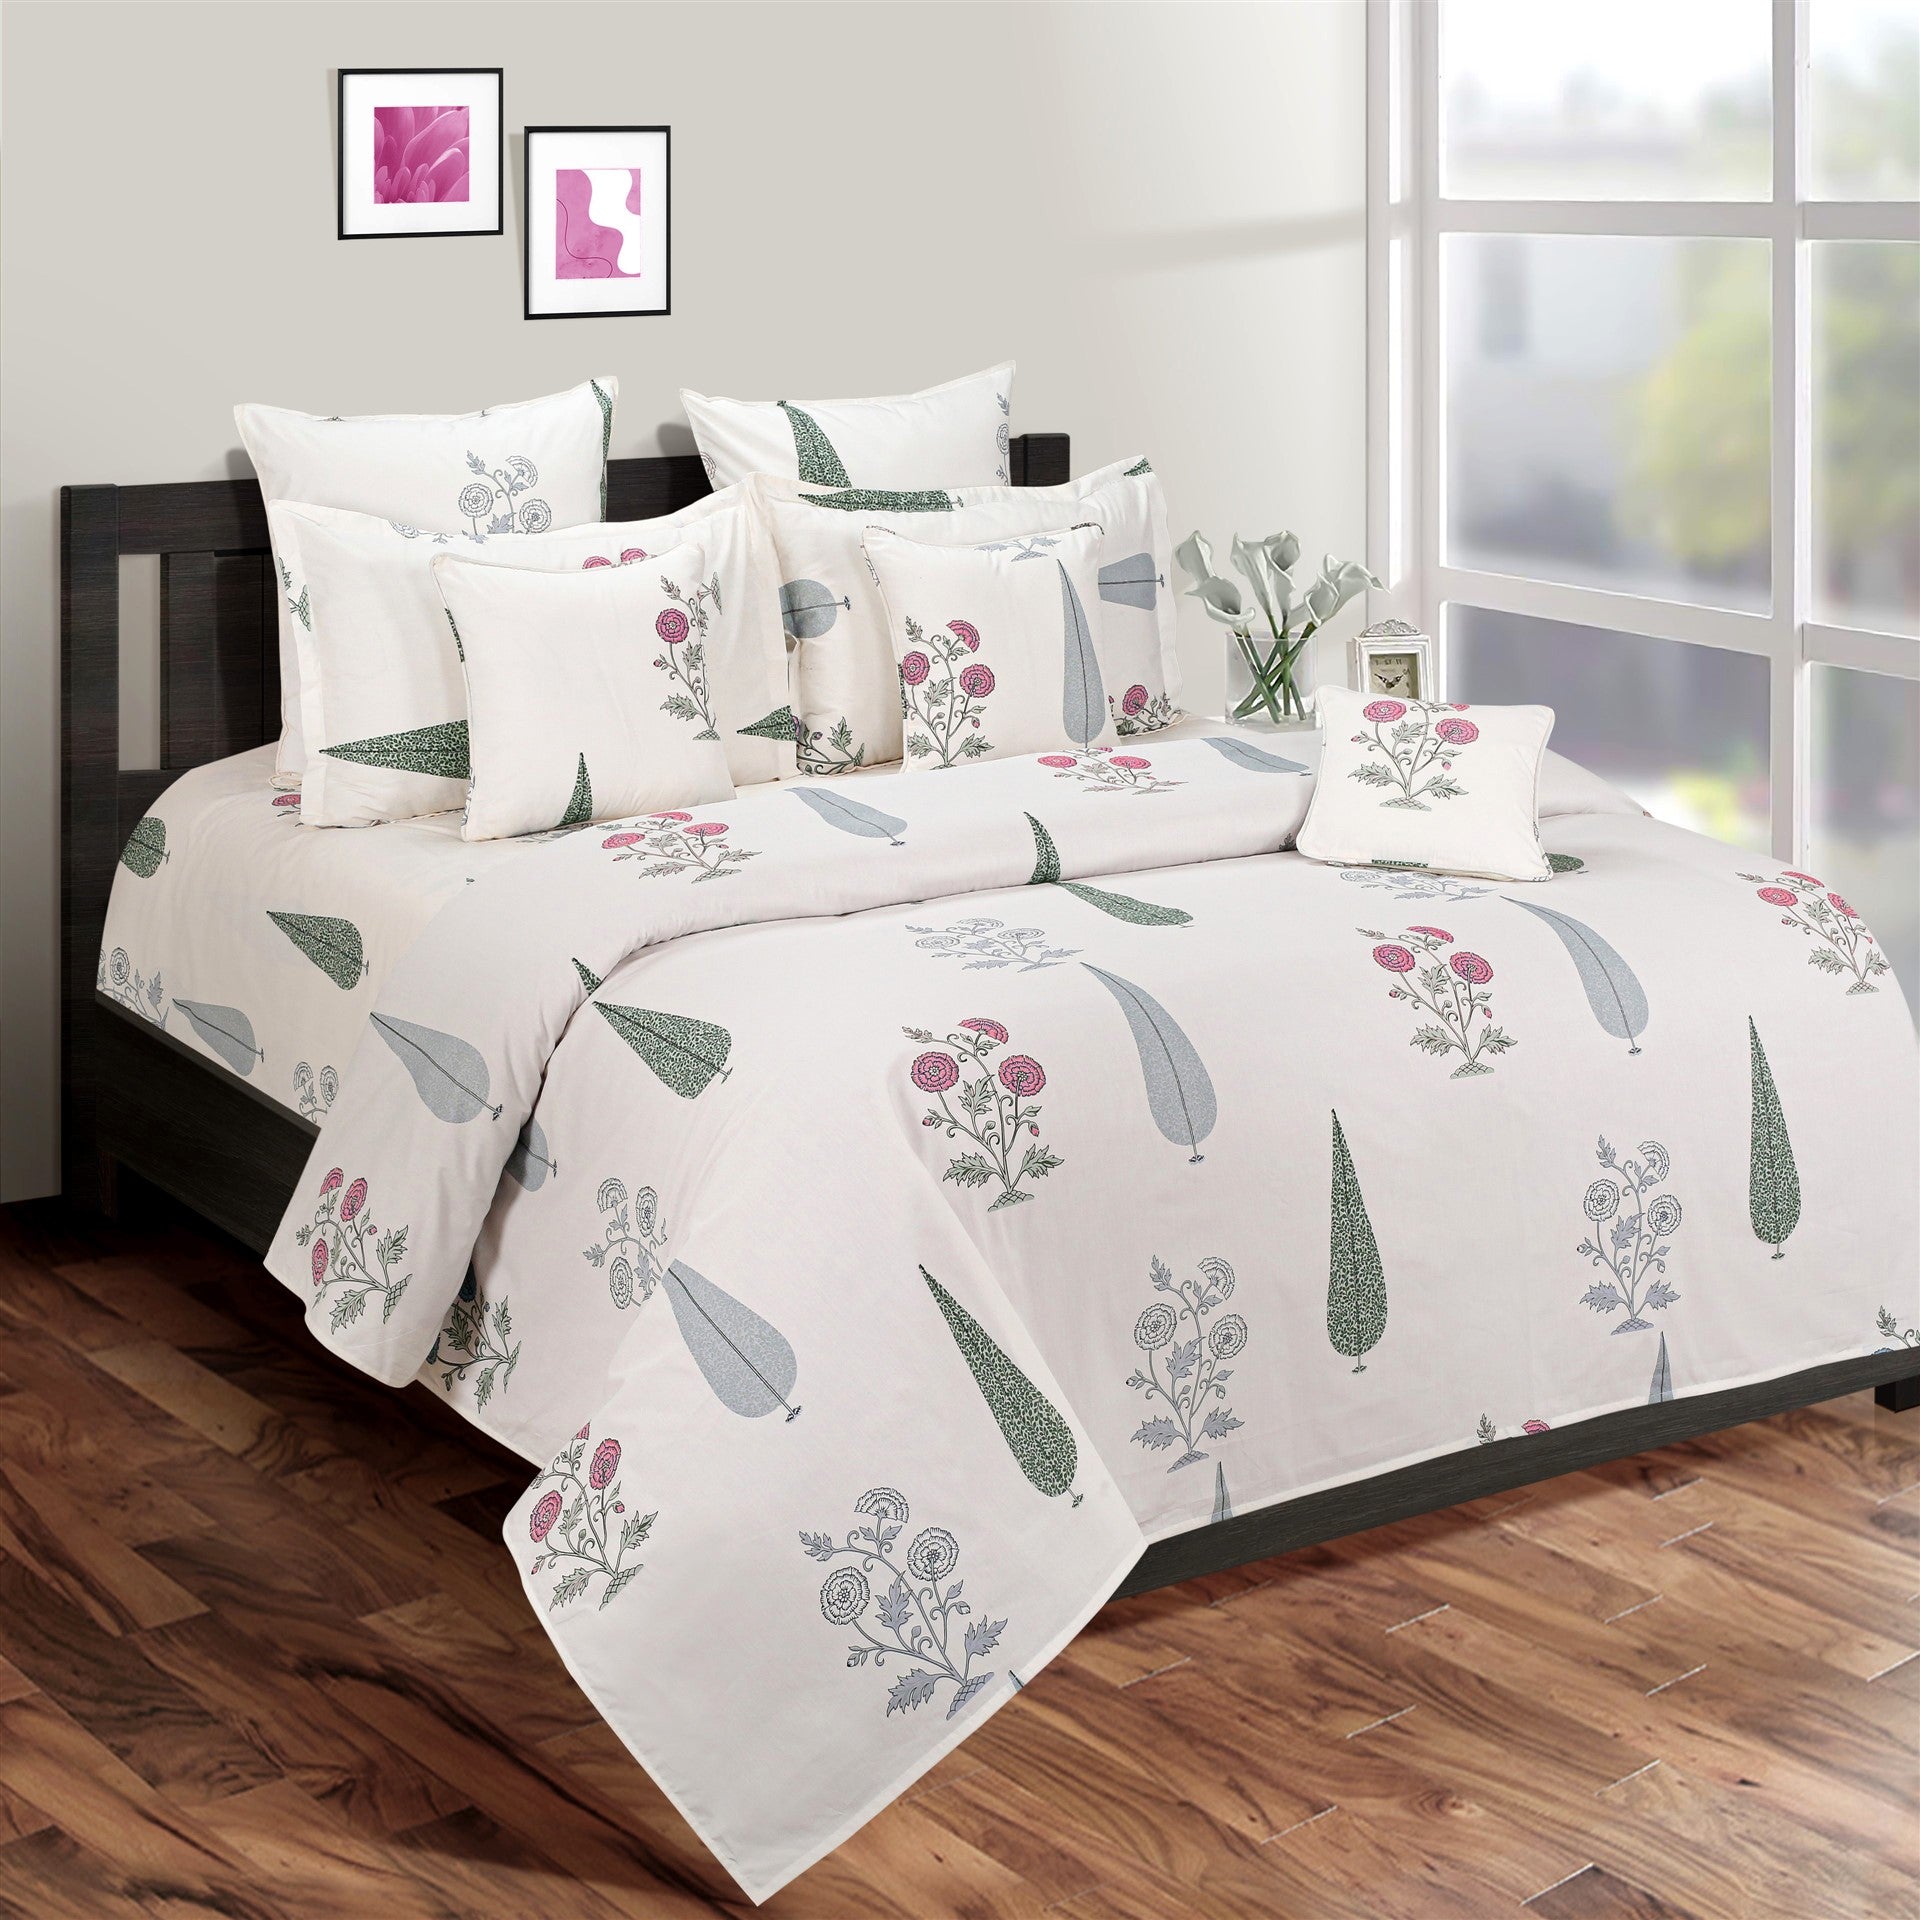 Detec™ Printed Veda Cotton Bed Sheet - 108 x 108 Inches